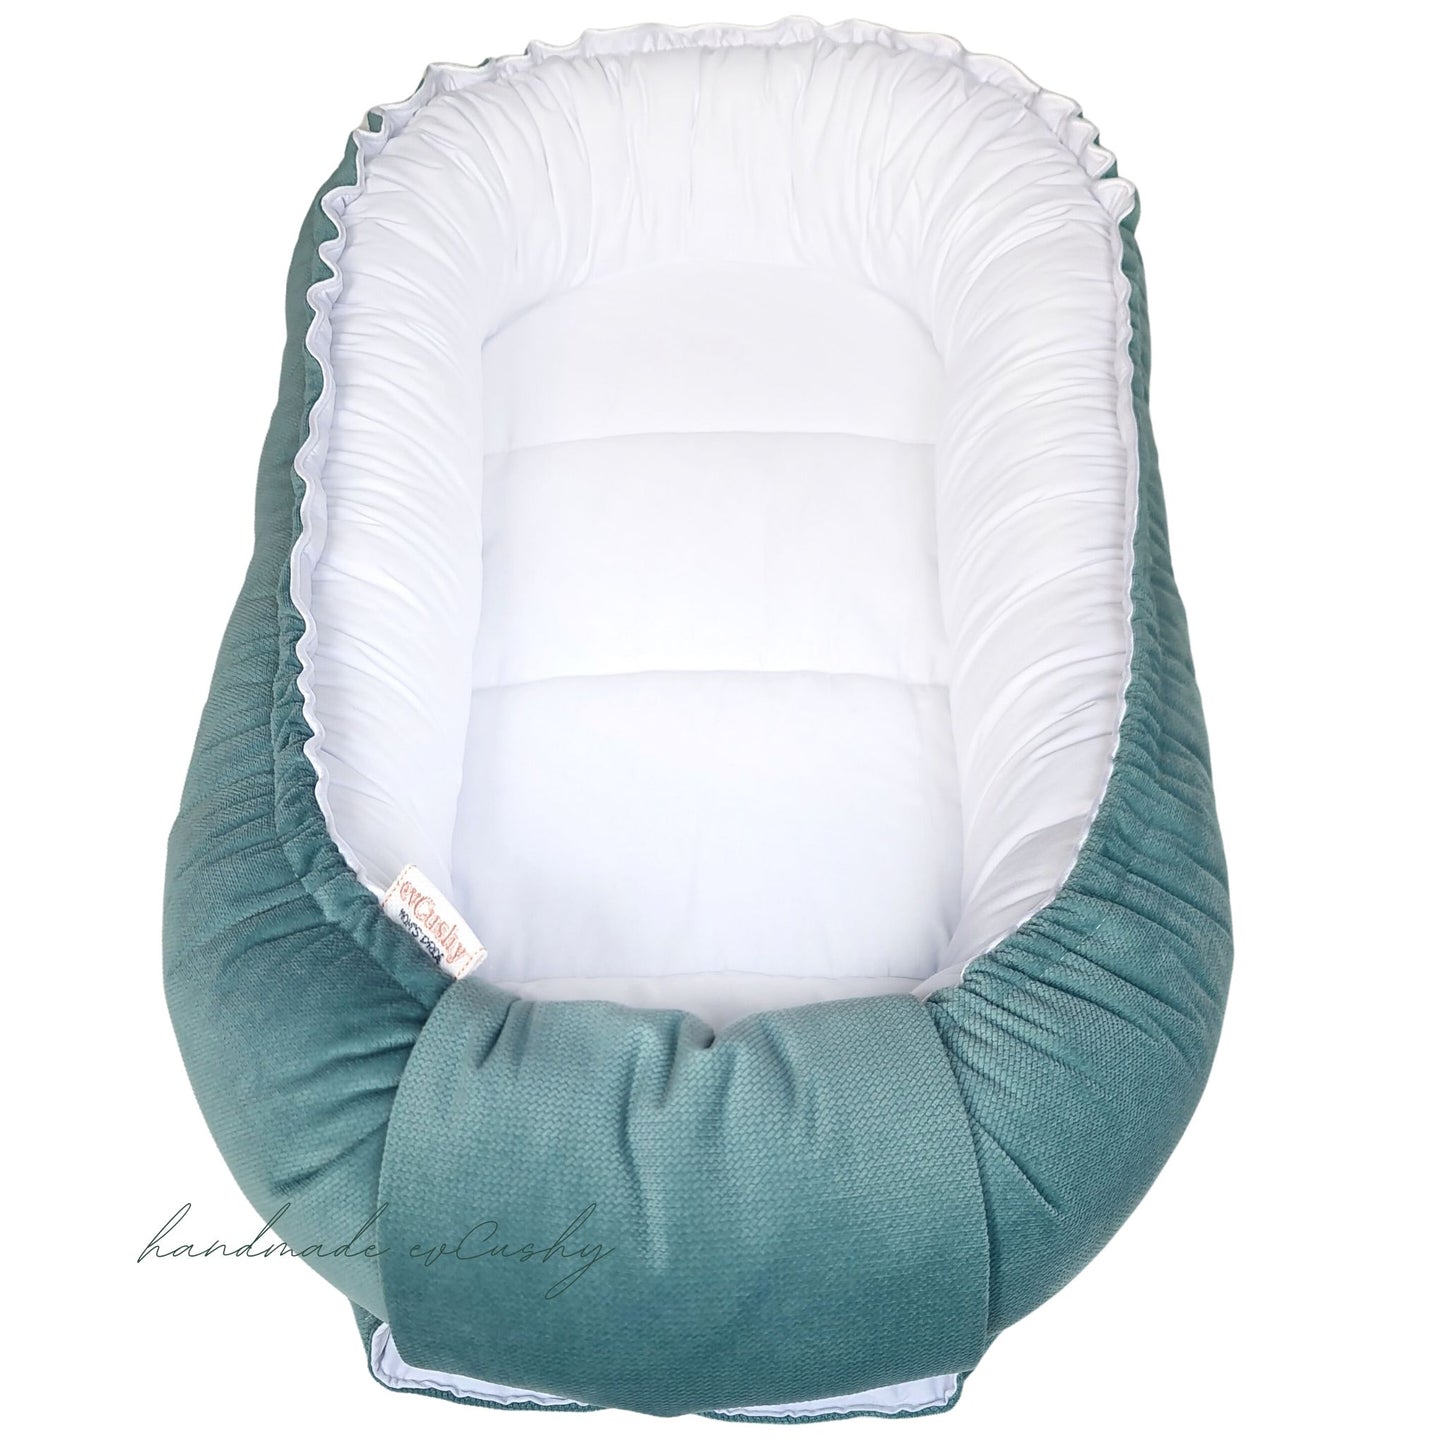 Luxurious white sateen cotton and mint green velvet Baby Nest Sleep Pod, designed for newborns to 7-9 months, certified safe materials, stylish and soothing.